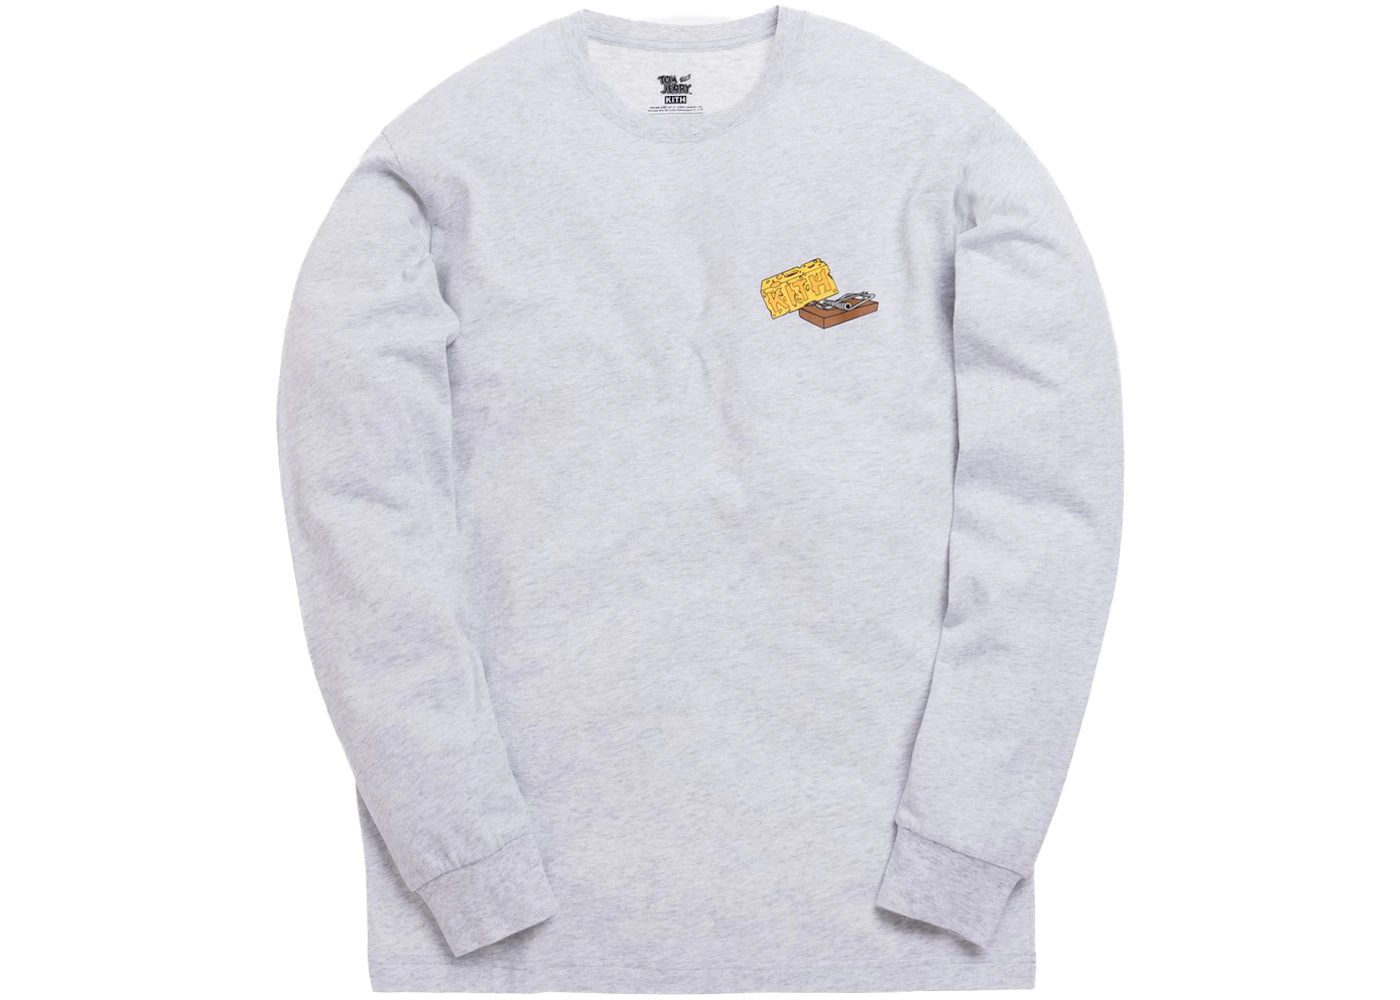 Kith x Tom & Jerry L/S Cheese Tee Light Heather Grey - SS19 - US